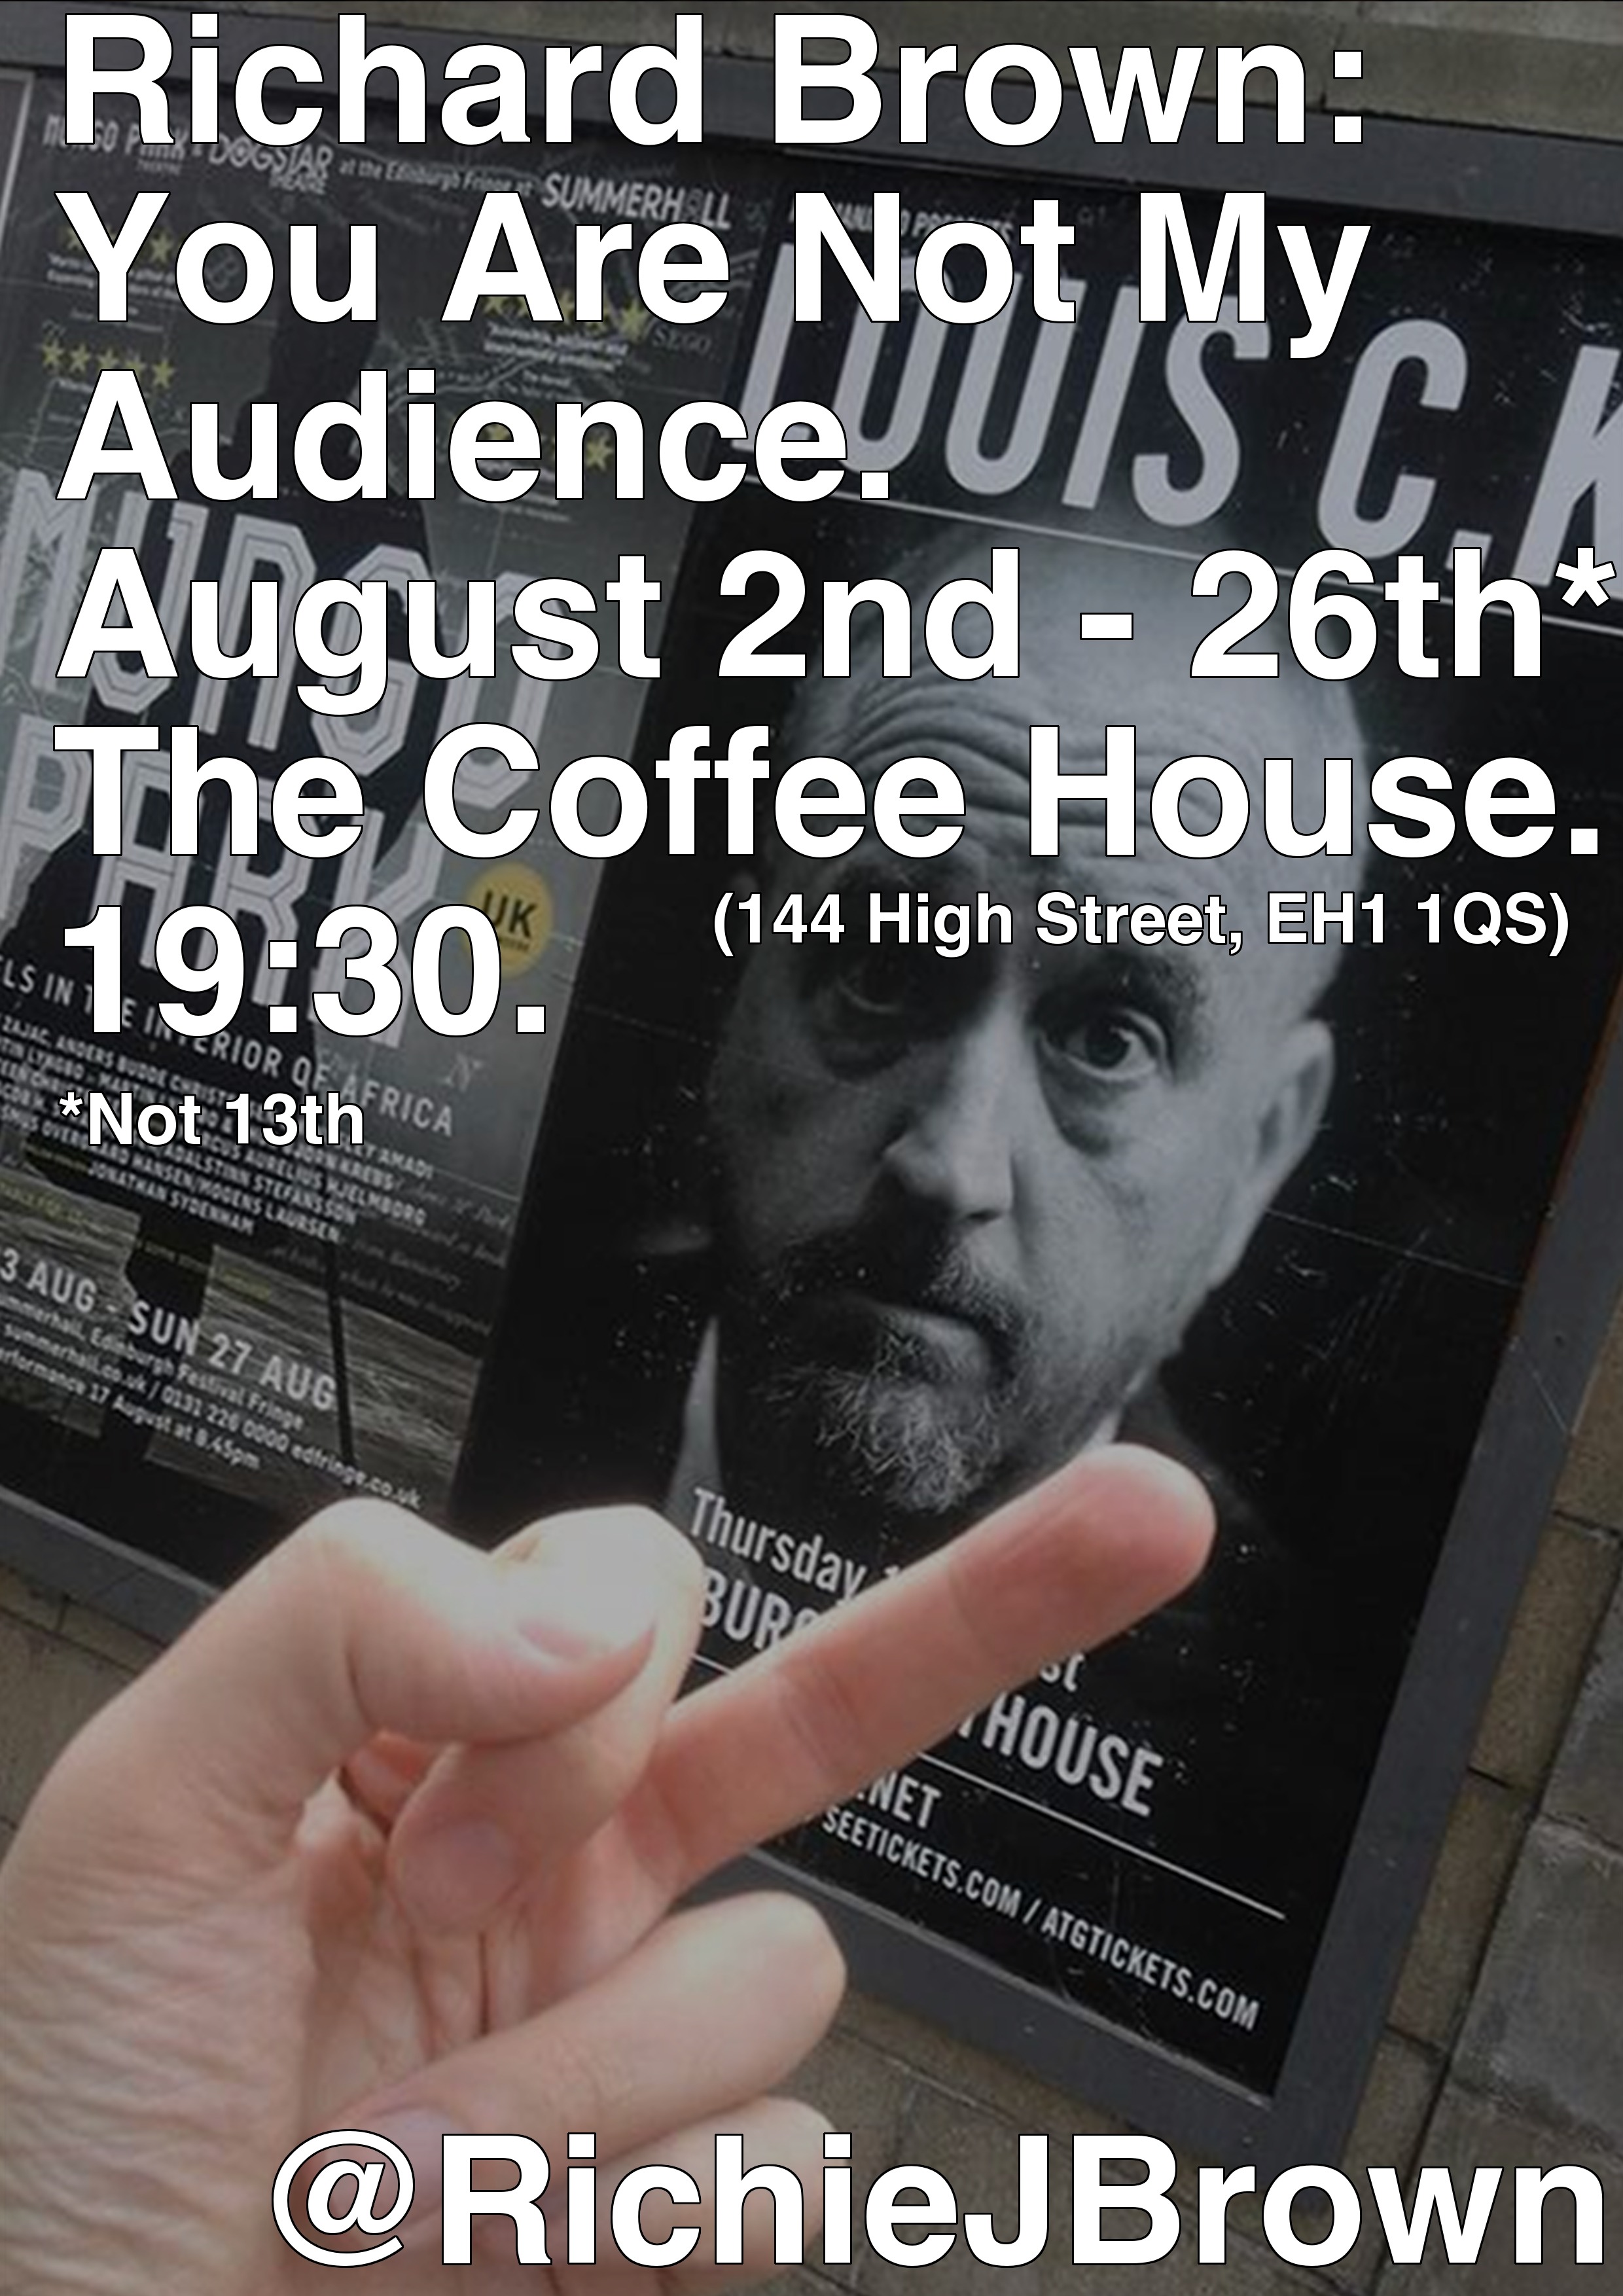 The poster for Richard Brown: You Are Not My Audience